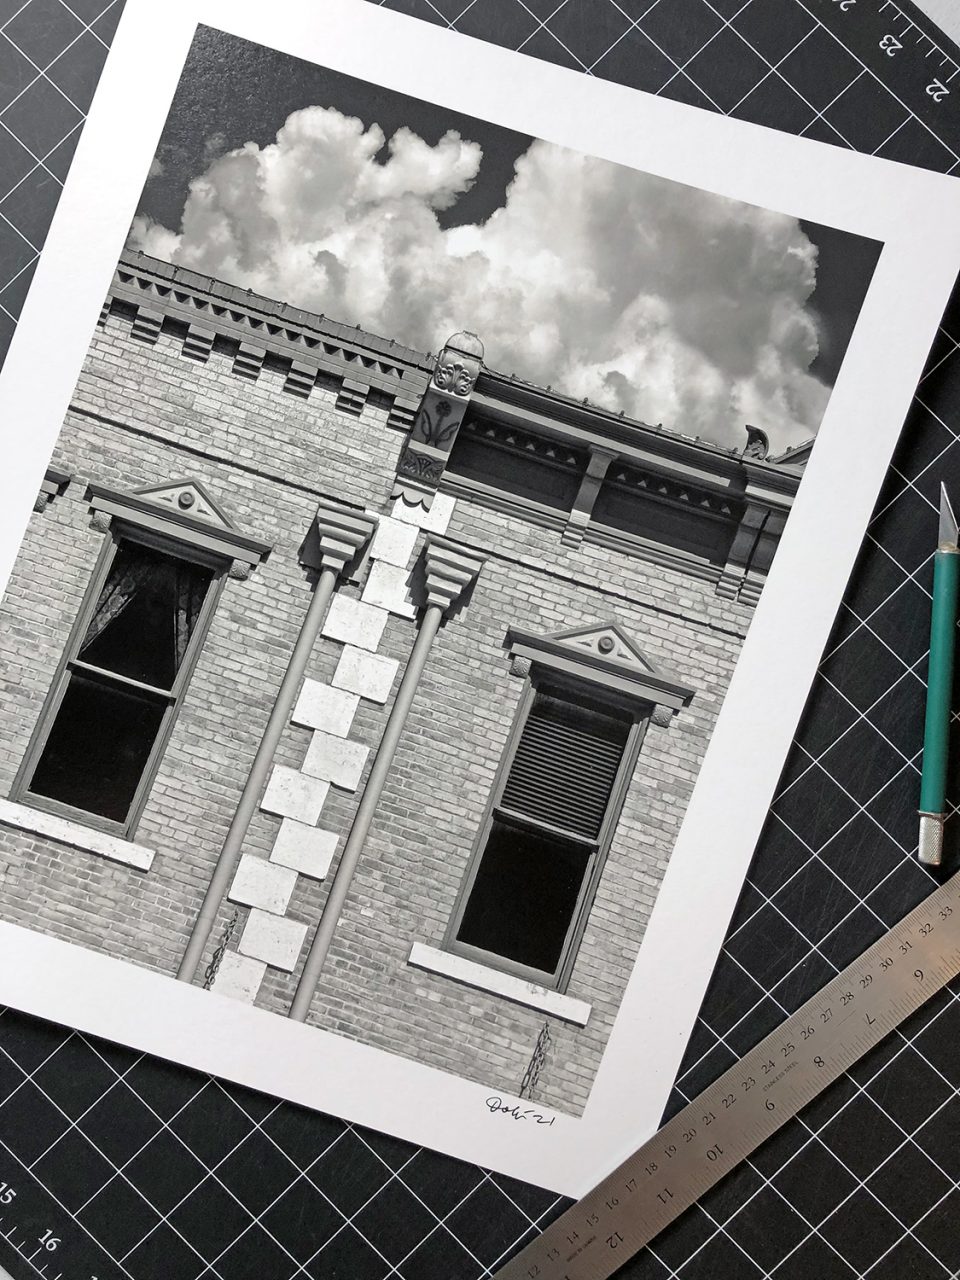 Black and white photograph of a historic building in Georgetown, Texas, shot by Keith Dotson in 2005 with an Olympus E-300 camera, printed in 2021 on Hahnemühle Fine Art Baryta paper.